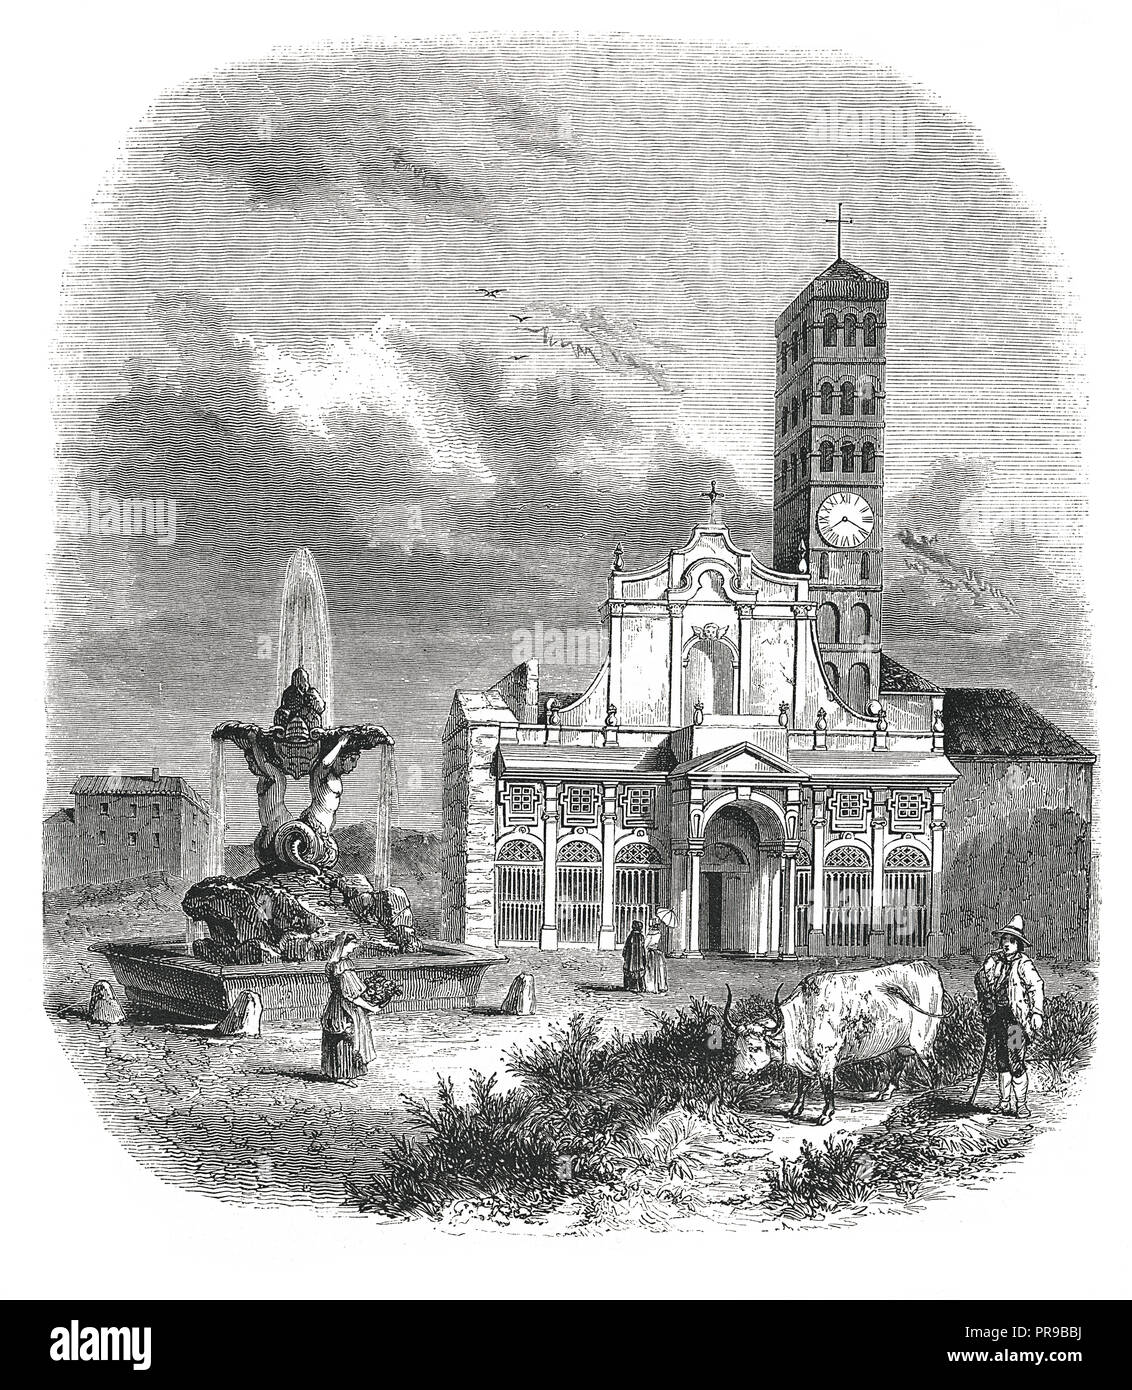 19th century illustration of the church Santa Maria in Cosmedin, Rome. Original artwork published in Le magasin Pittoresque by M. A. Lachevardiere, Pa Stock Photo